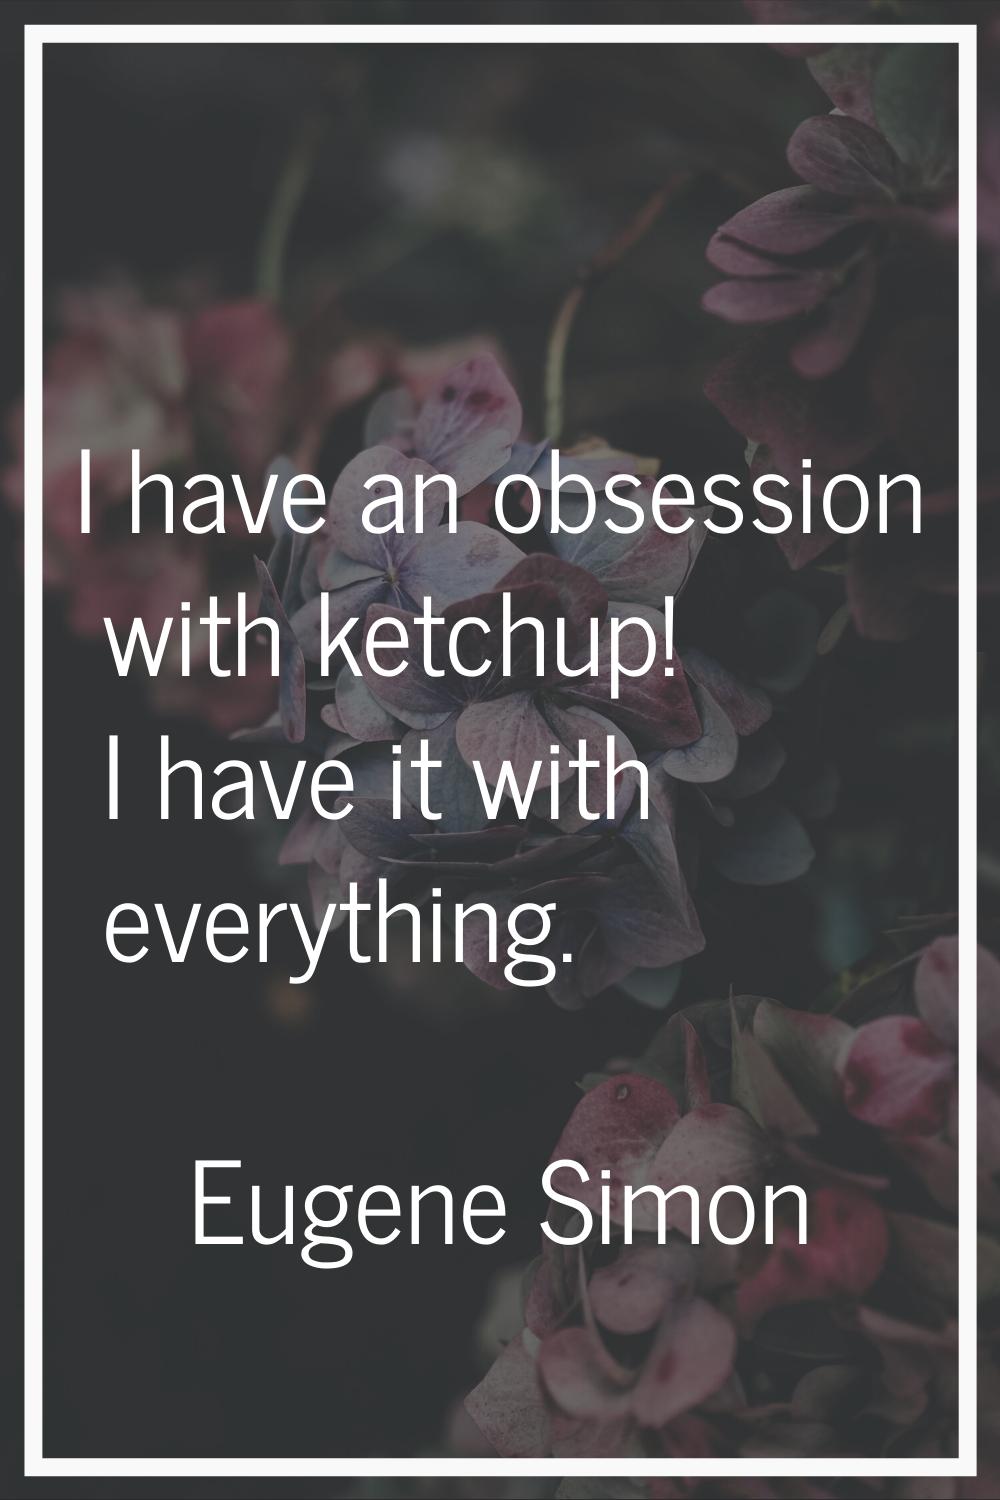 I have an obsession with ketchup! I have it with everything.